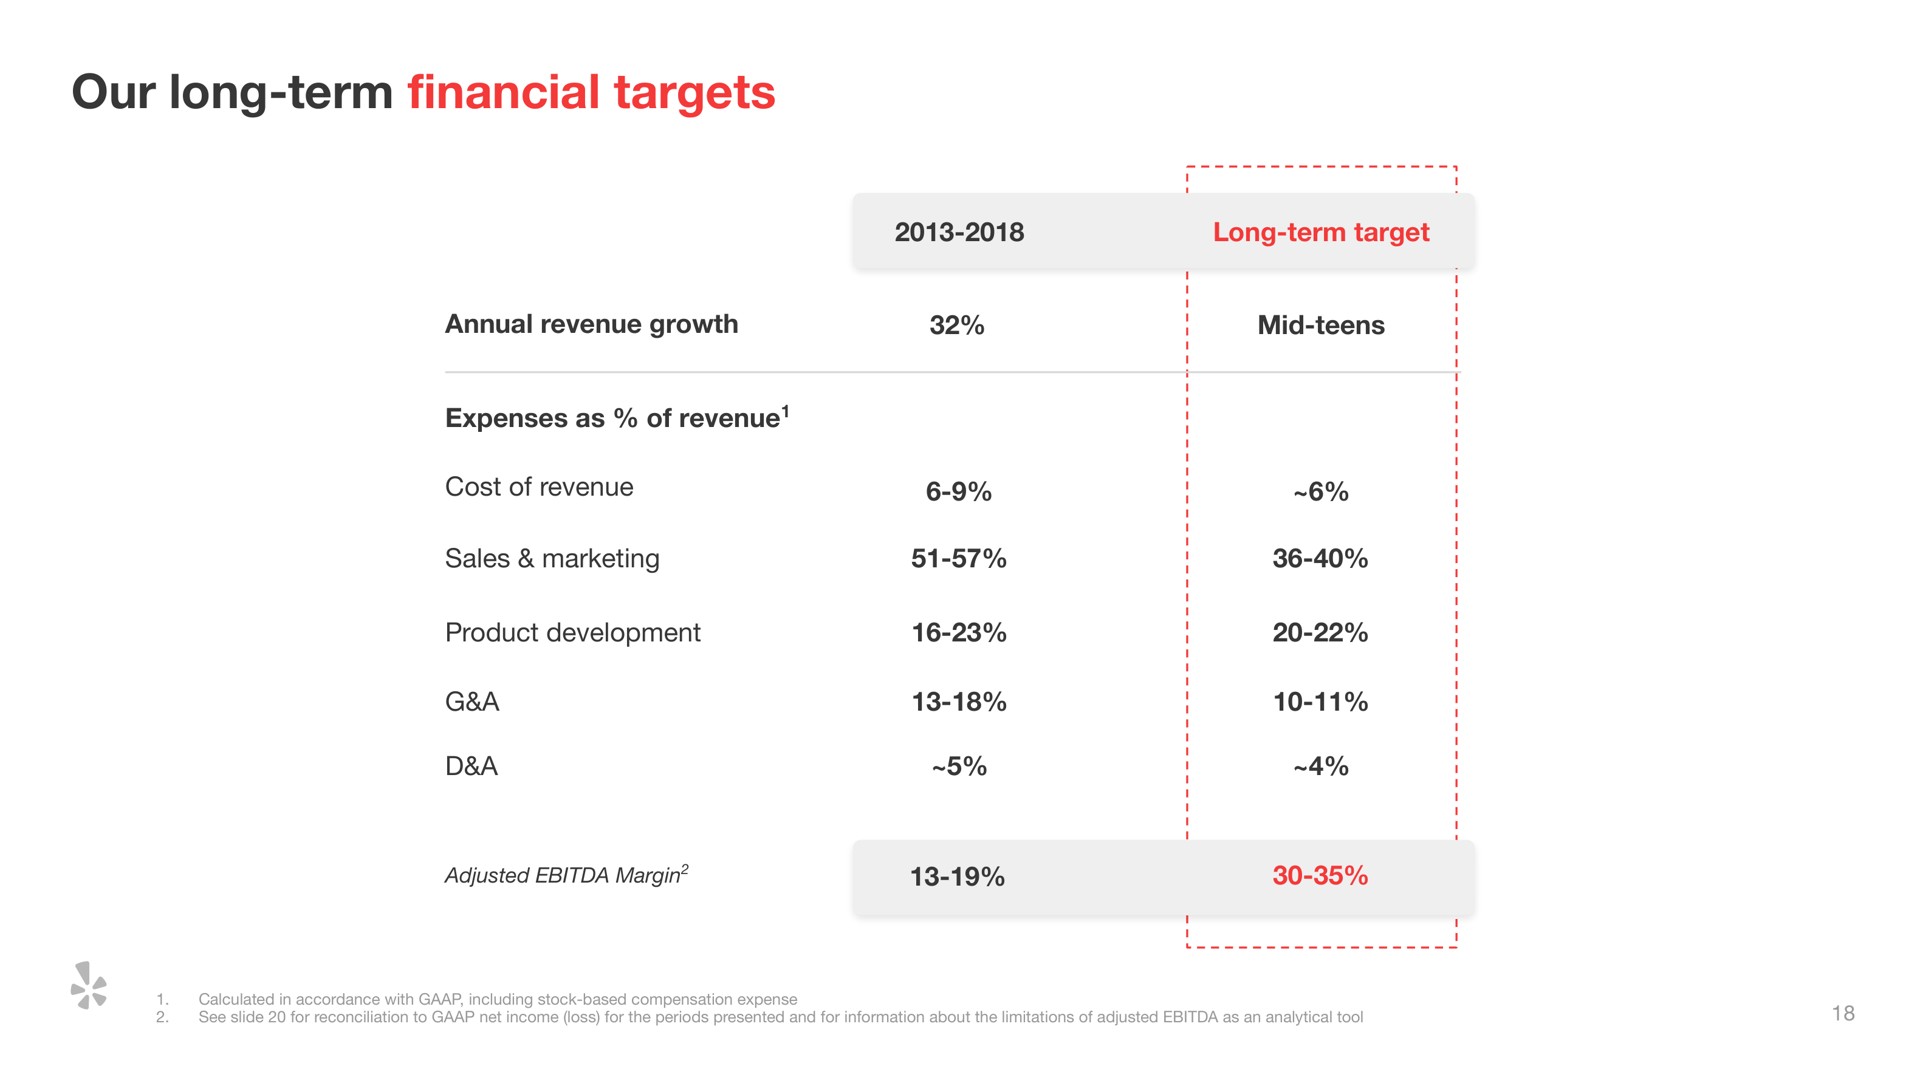 our long term targets financial | Yelp